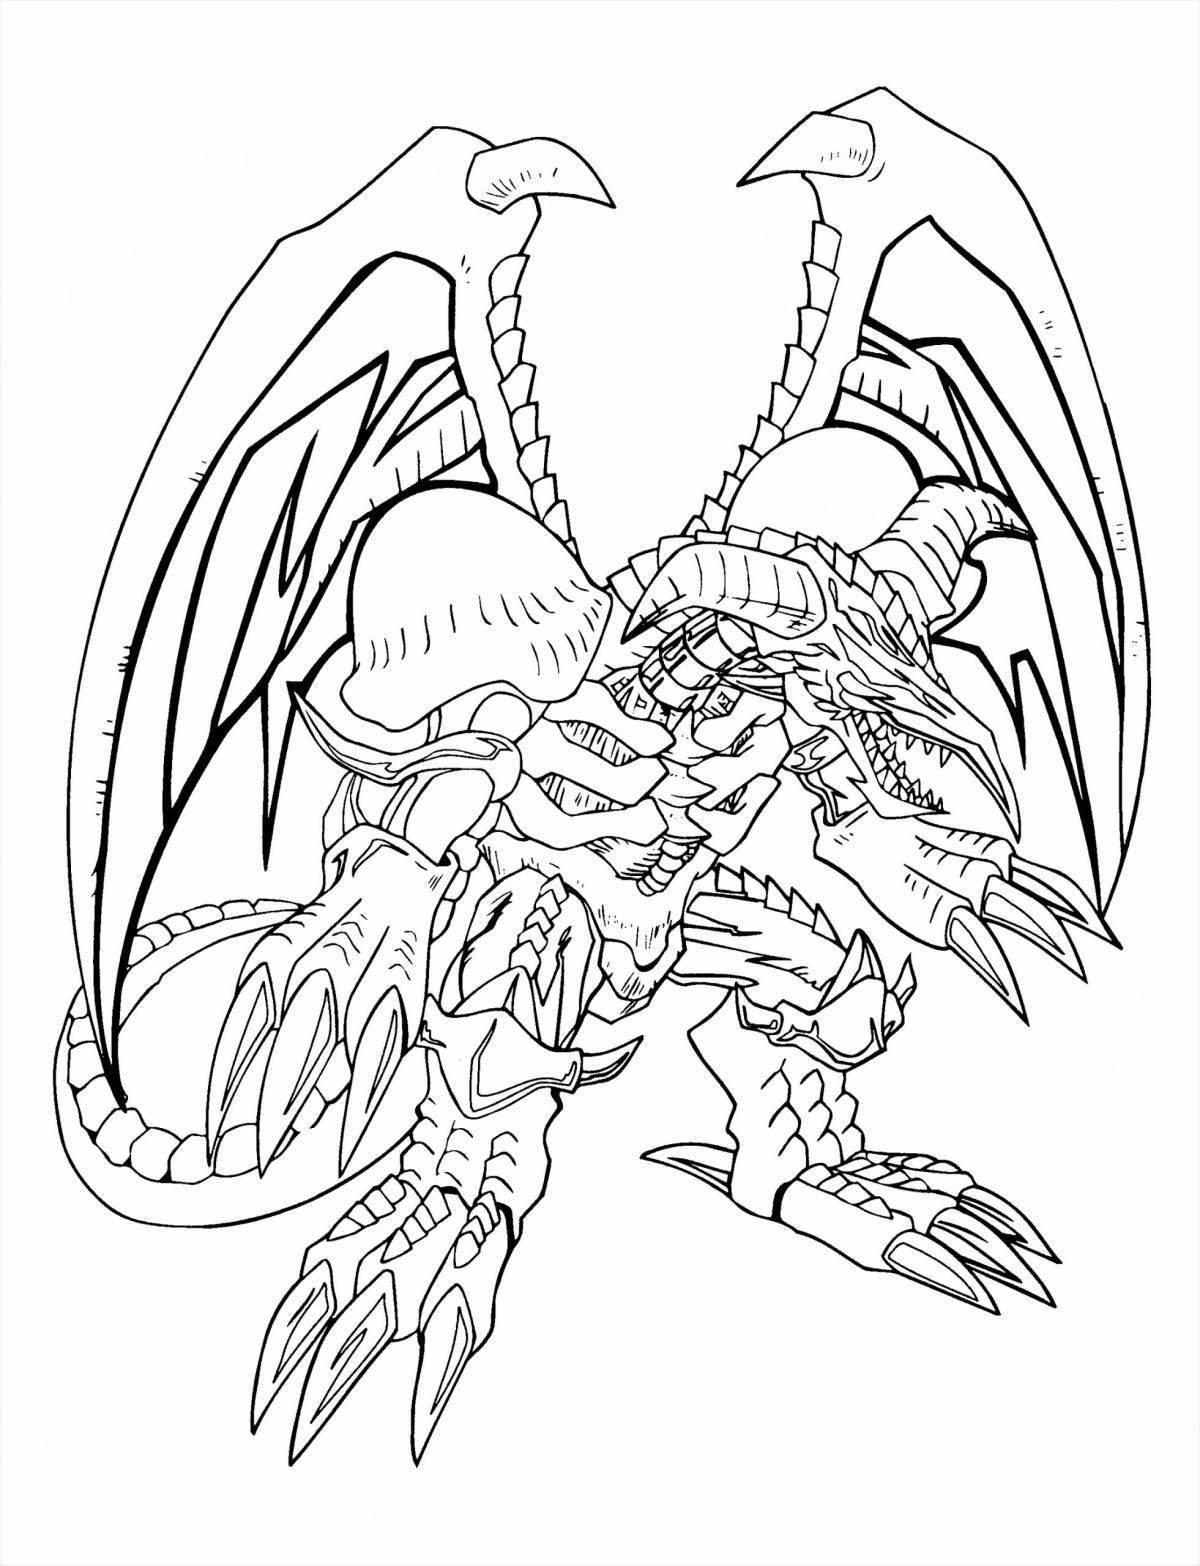 Flawless robot with siren head coloring page